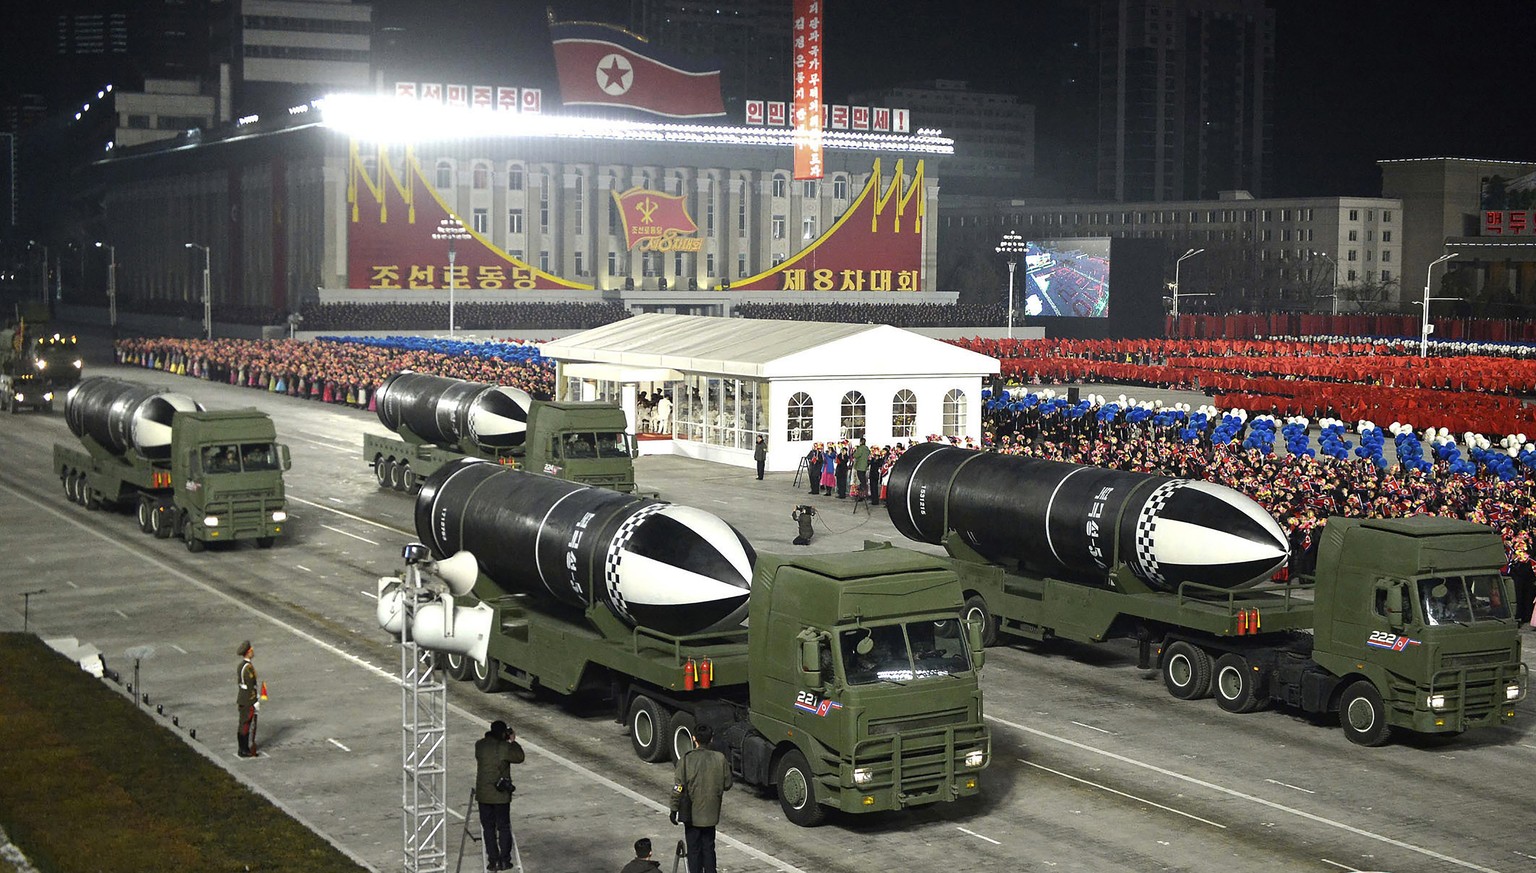 FILE - This photo provided by the North Korean government shows missiles during a military parade marking the ruling party congress, at Kim Il Sung Square in Pyongyang, North Korea on Jan. 14, 2021. I ...